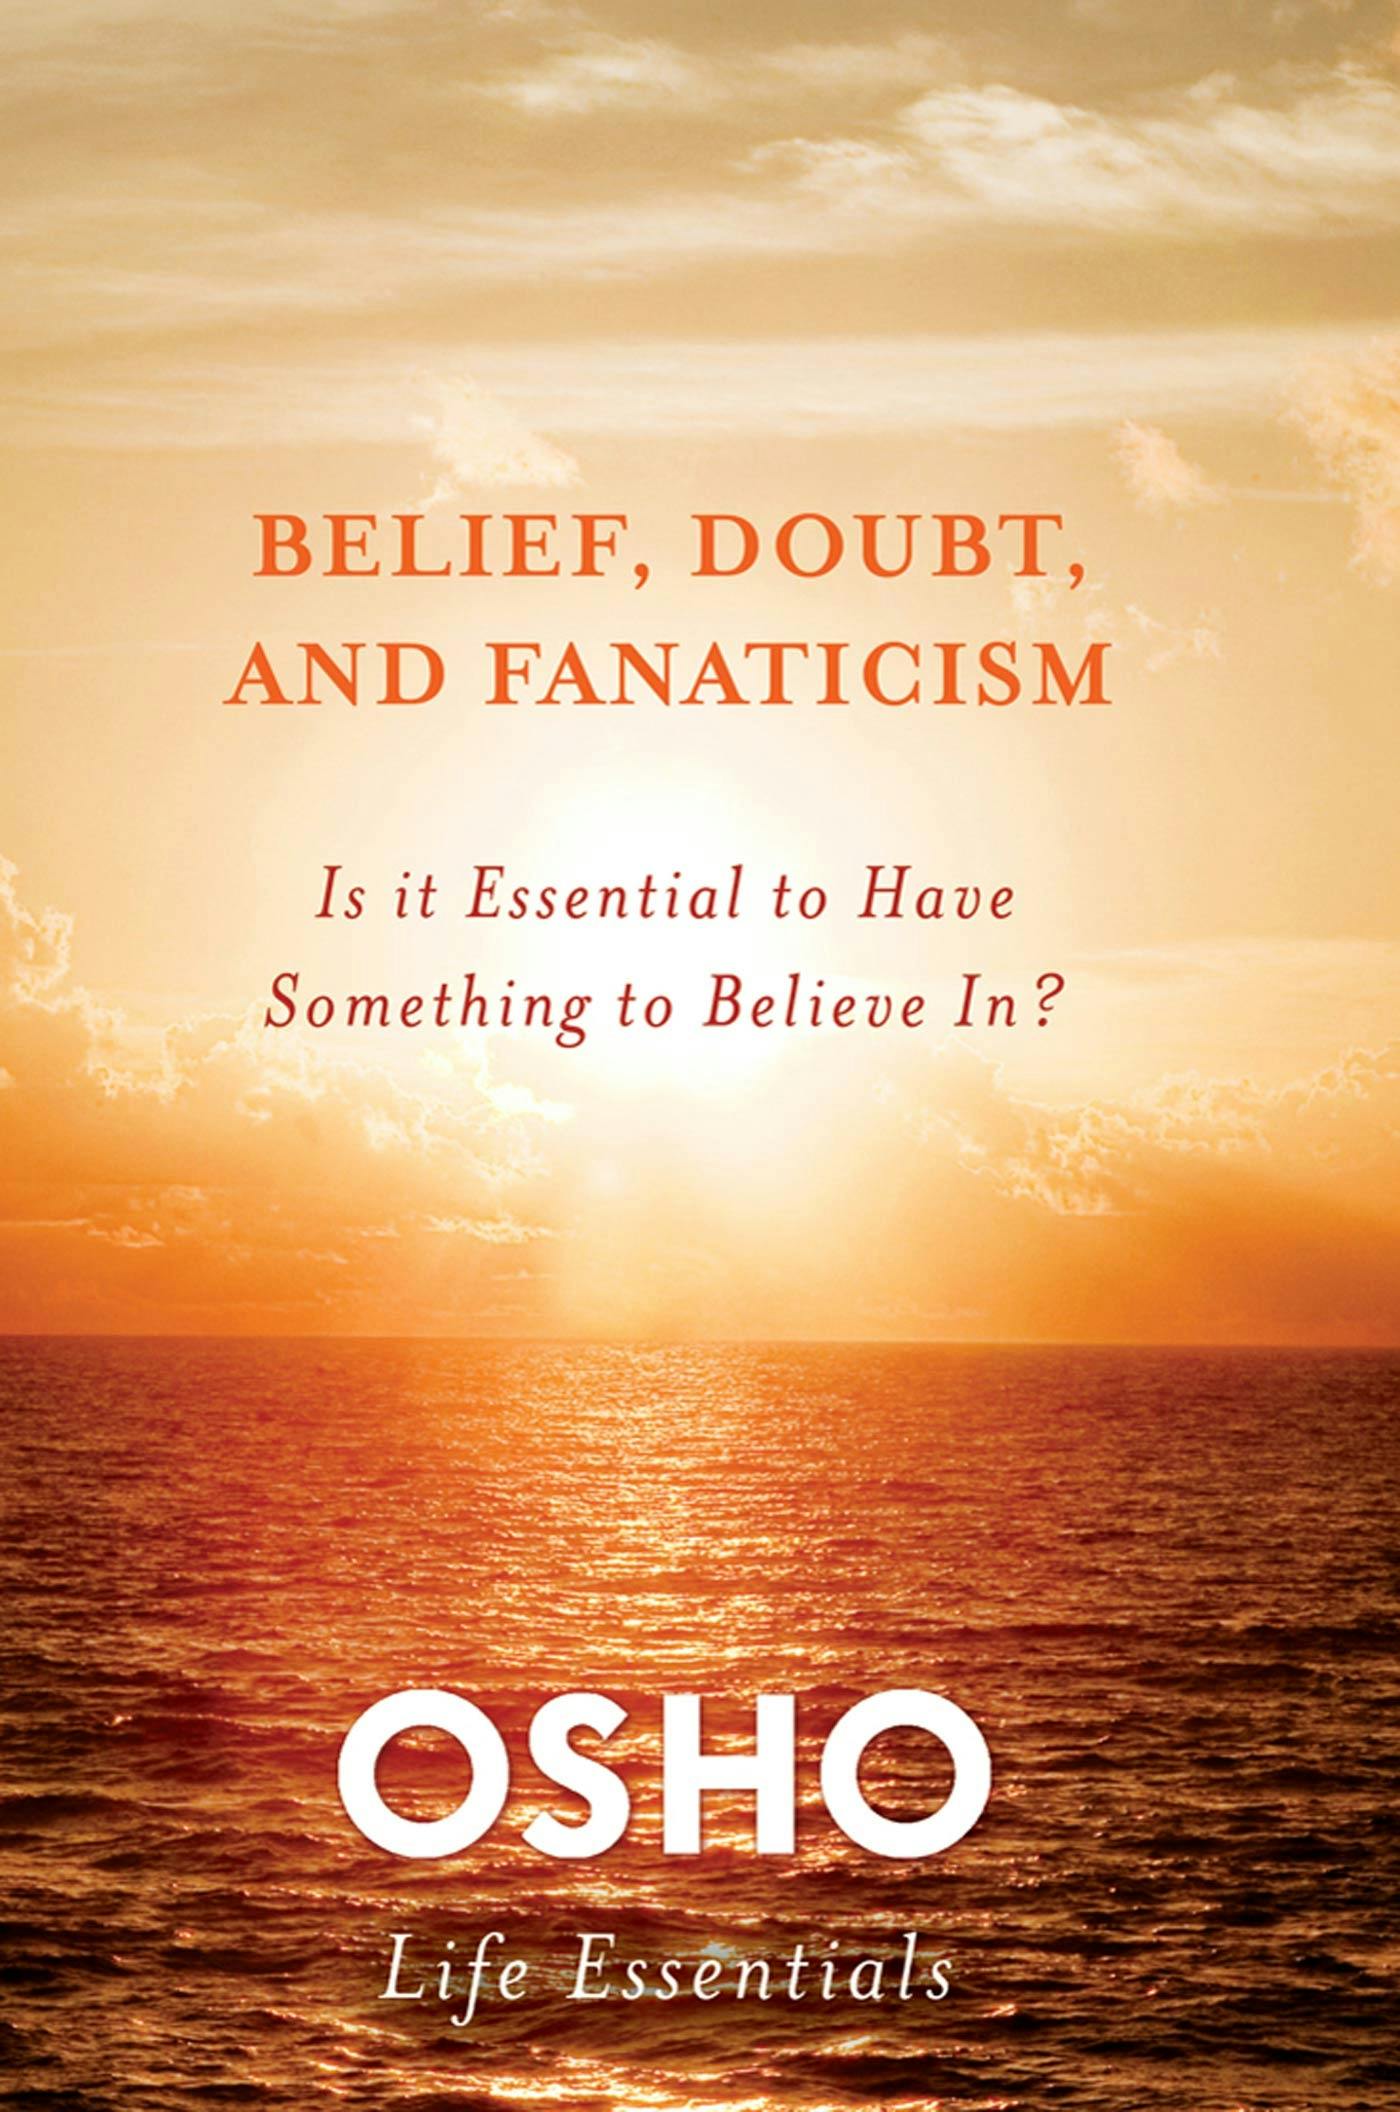 Image of Belief, Doubt, and Fanaticism